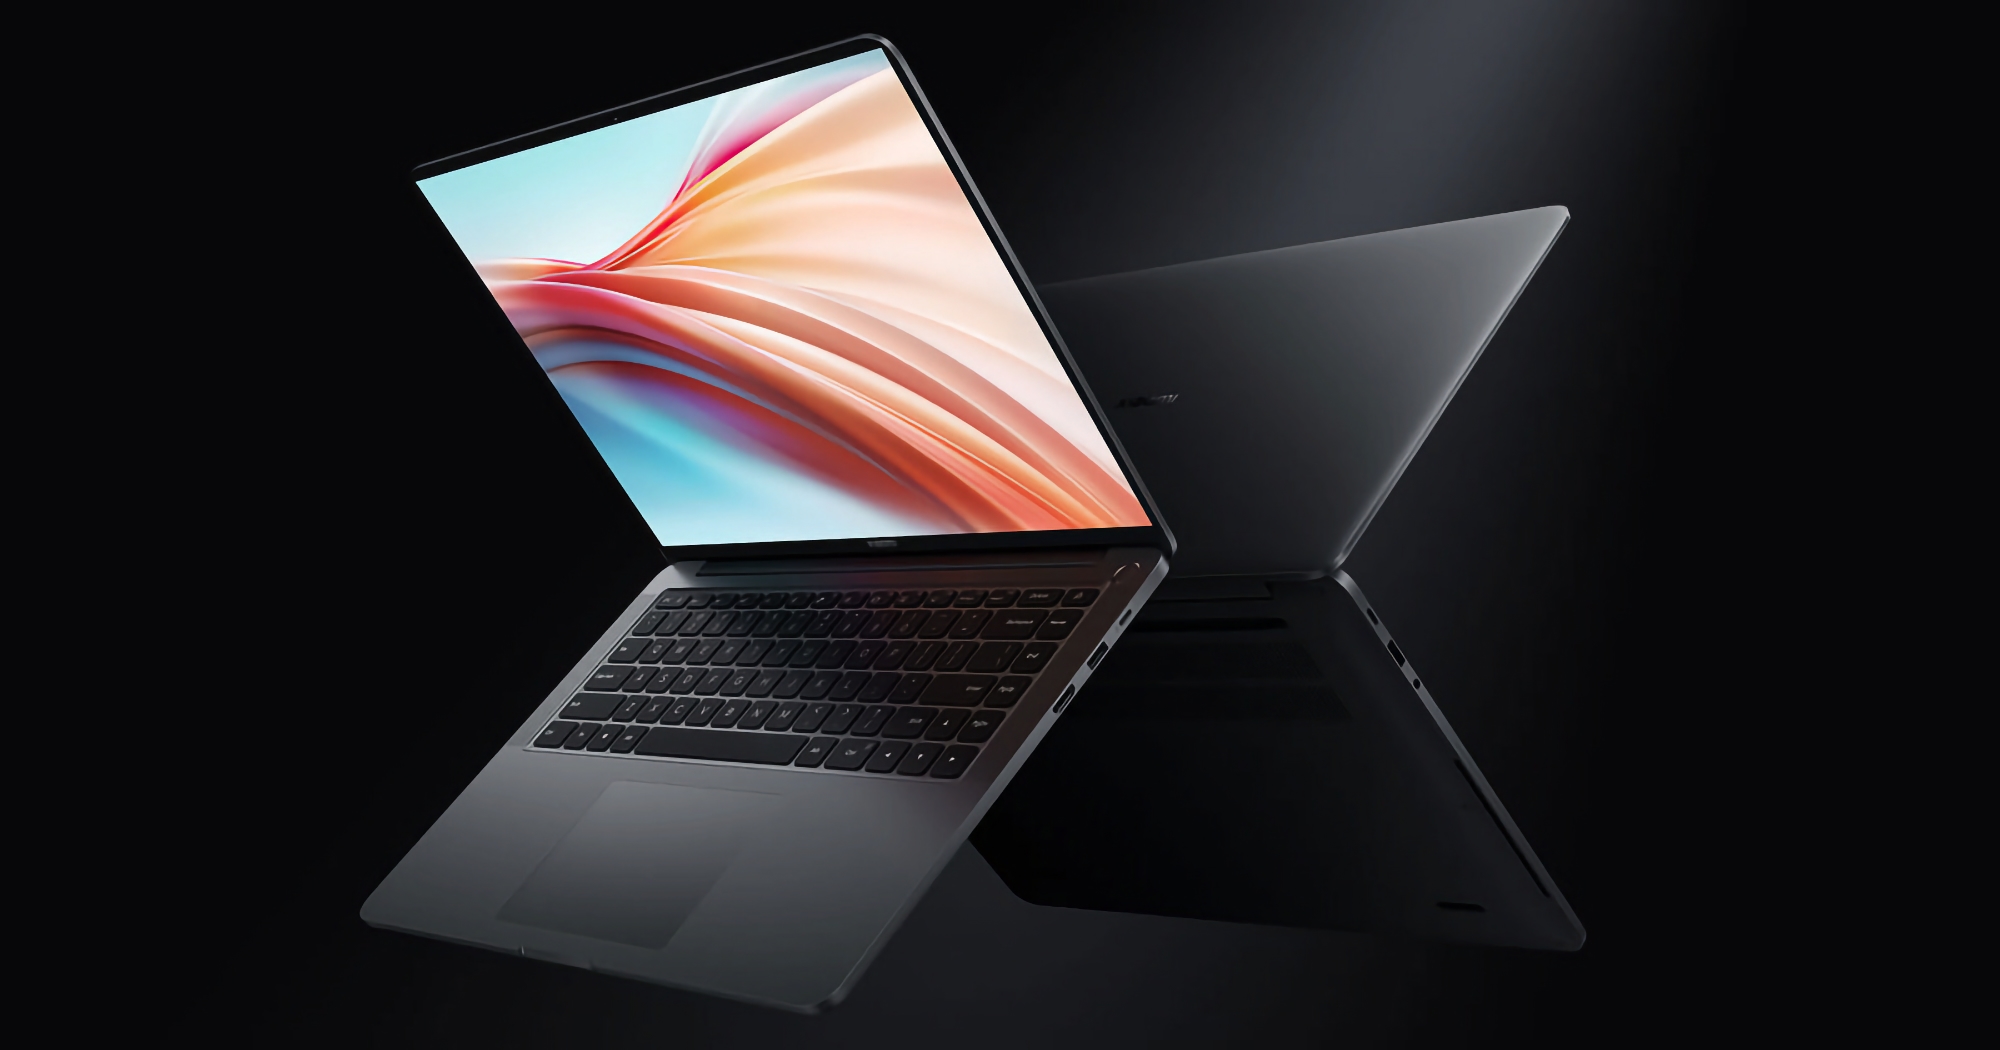 Xiaomi is working on a laptop with Intel's new Meteor Lake processor